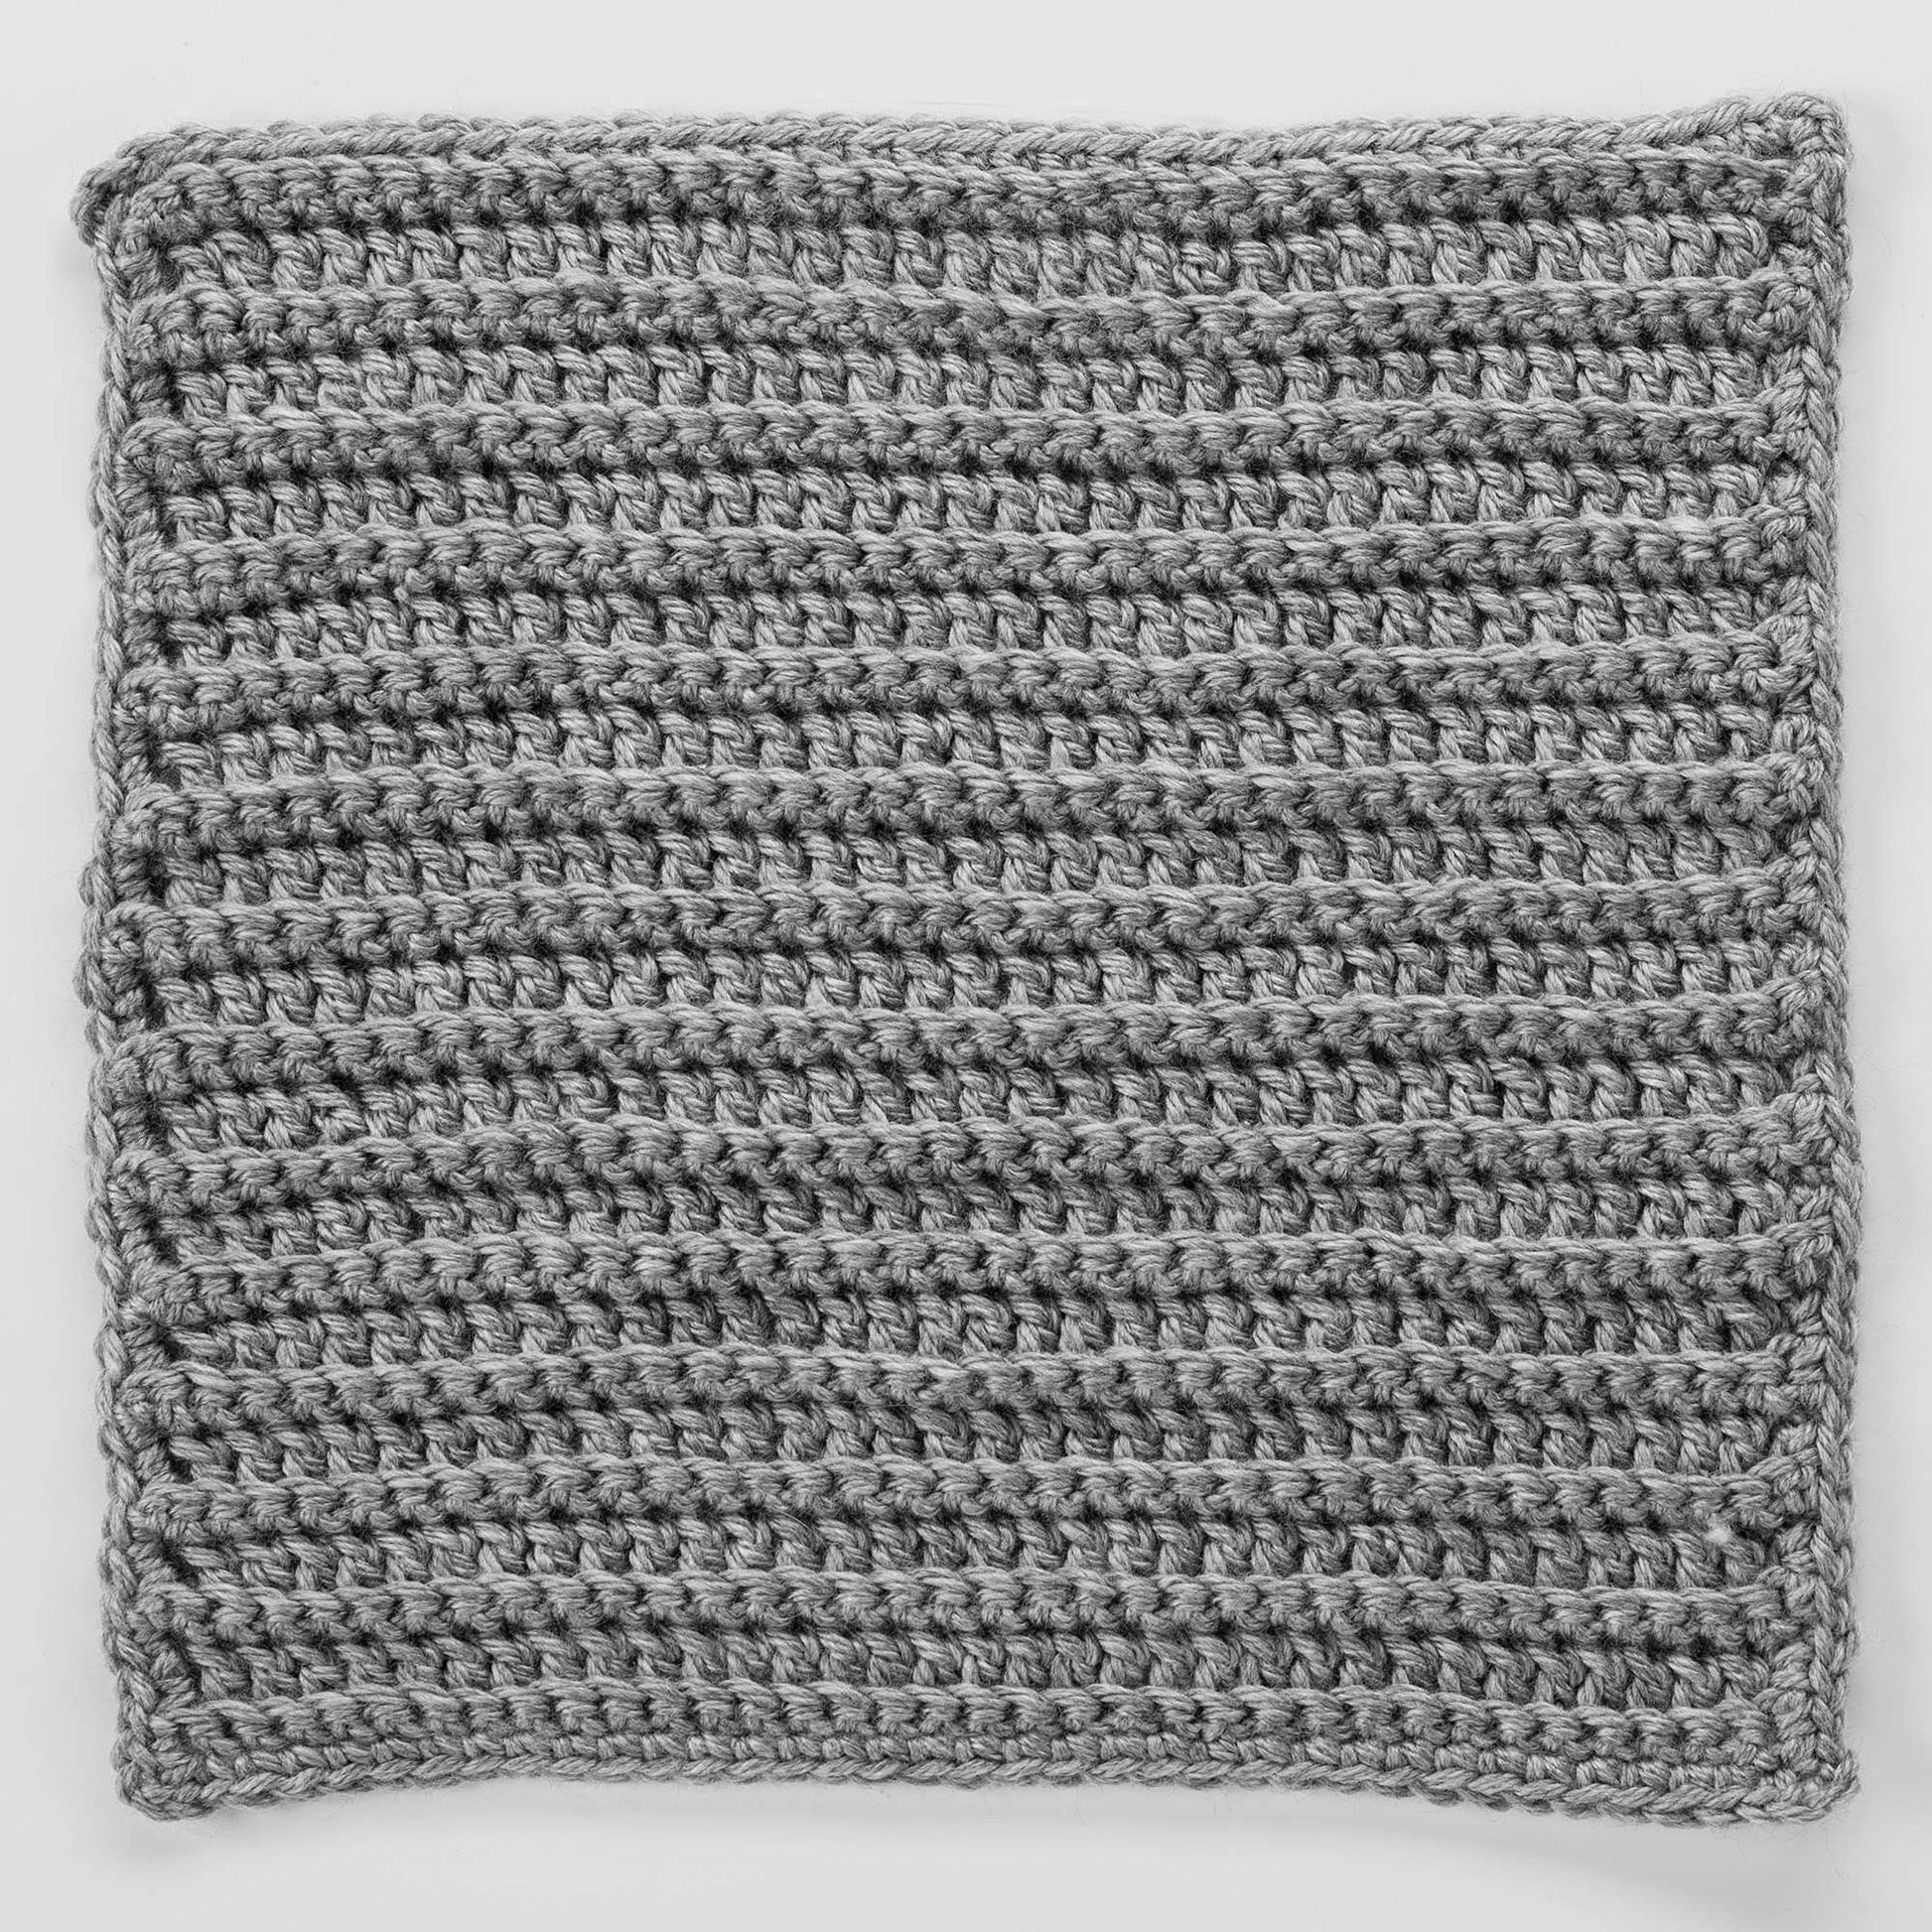 Free Red Heart Back Loops Square For Checkerboard Textures Throw Crochet Pattern